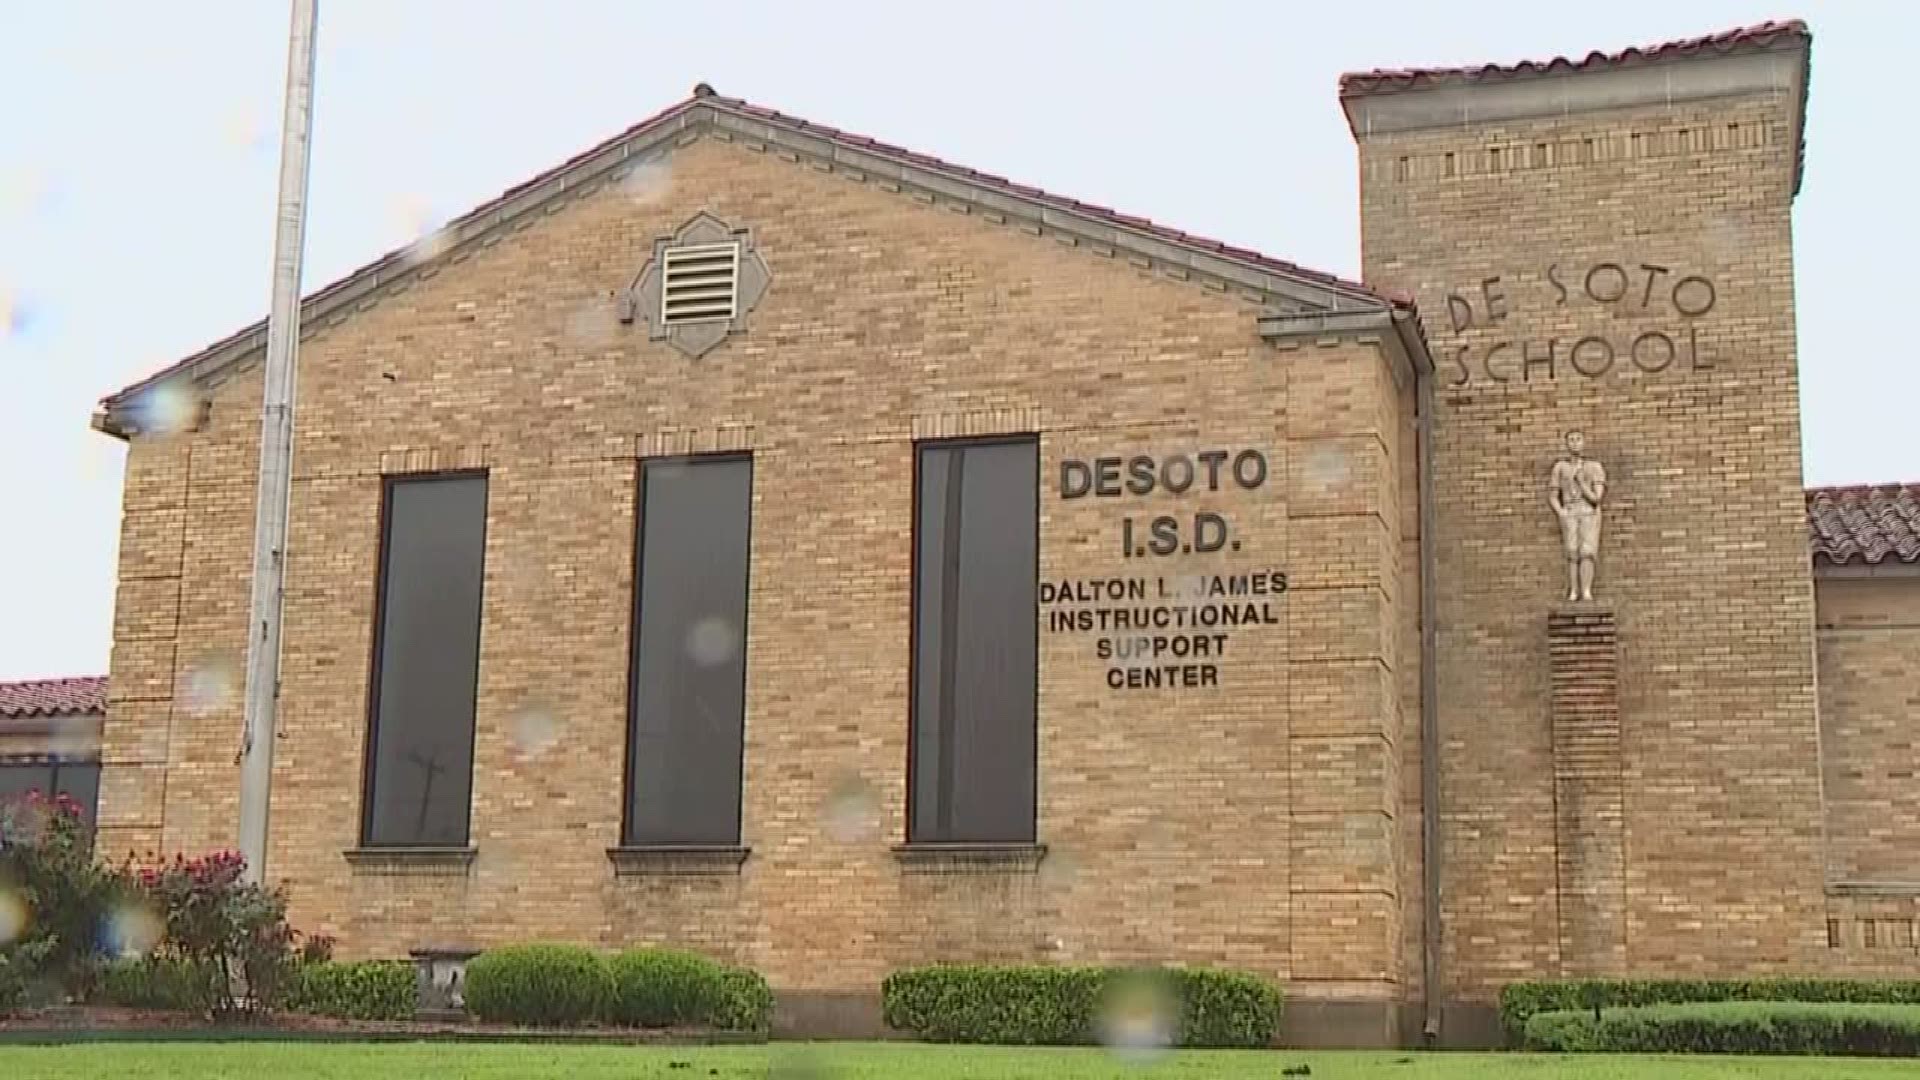 Demond Fernandez reports on alleged financial mismanagement in DeSoto ISD, where employees are waiting on delayed pay checks.